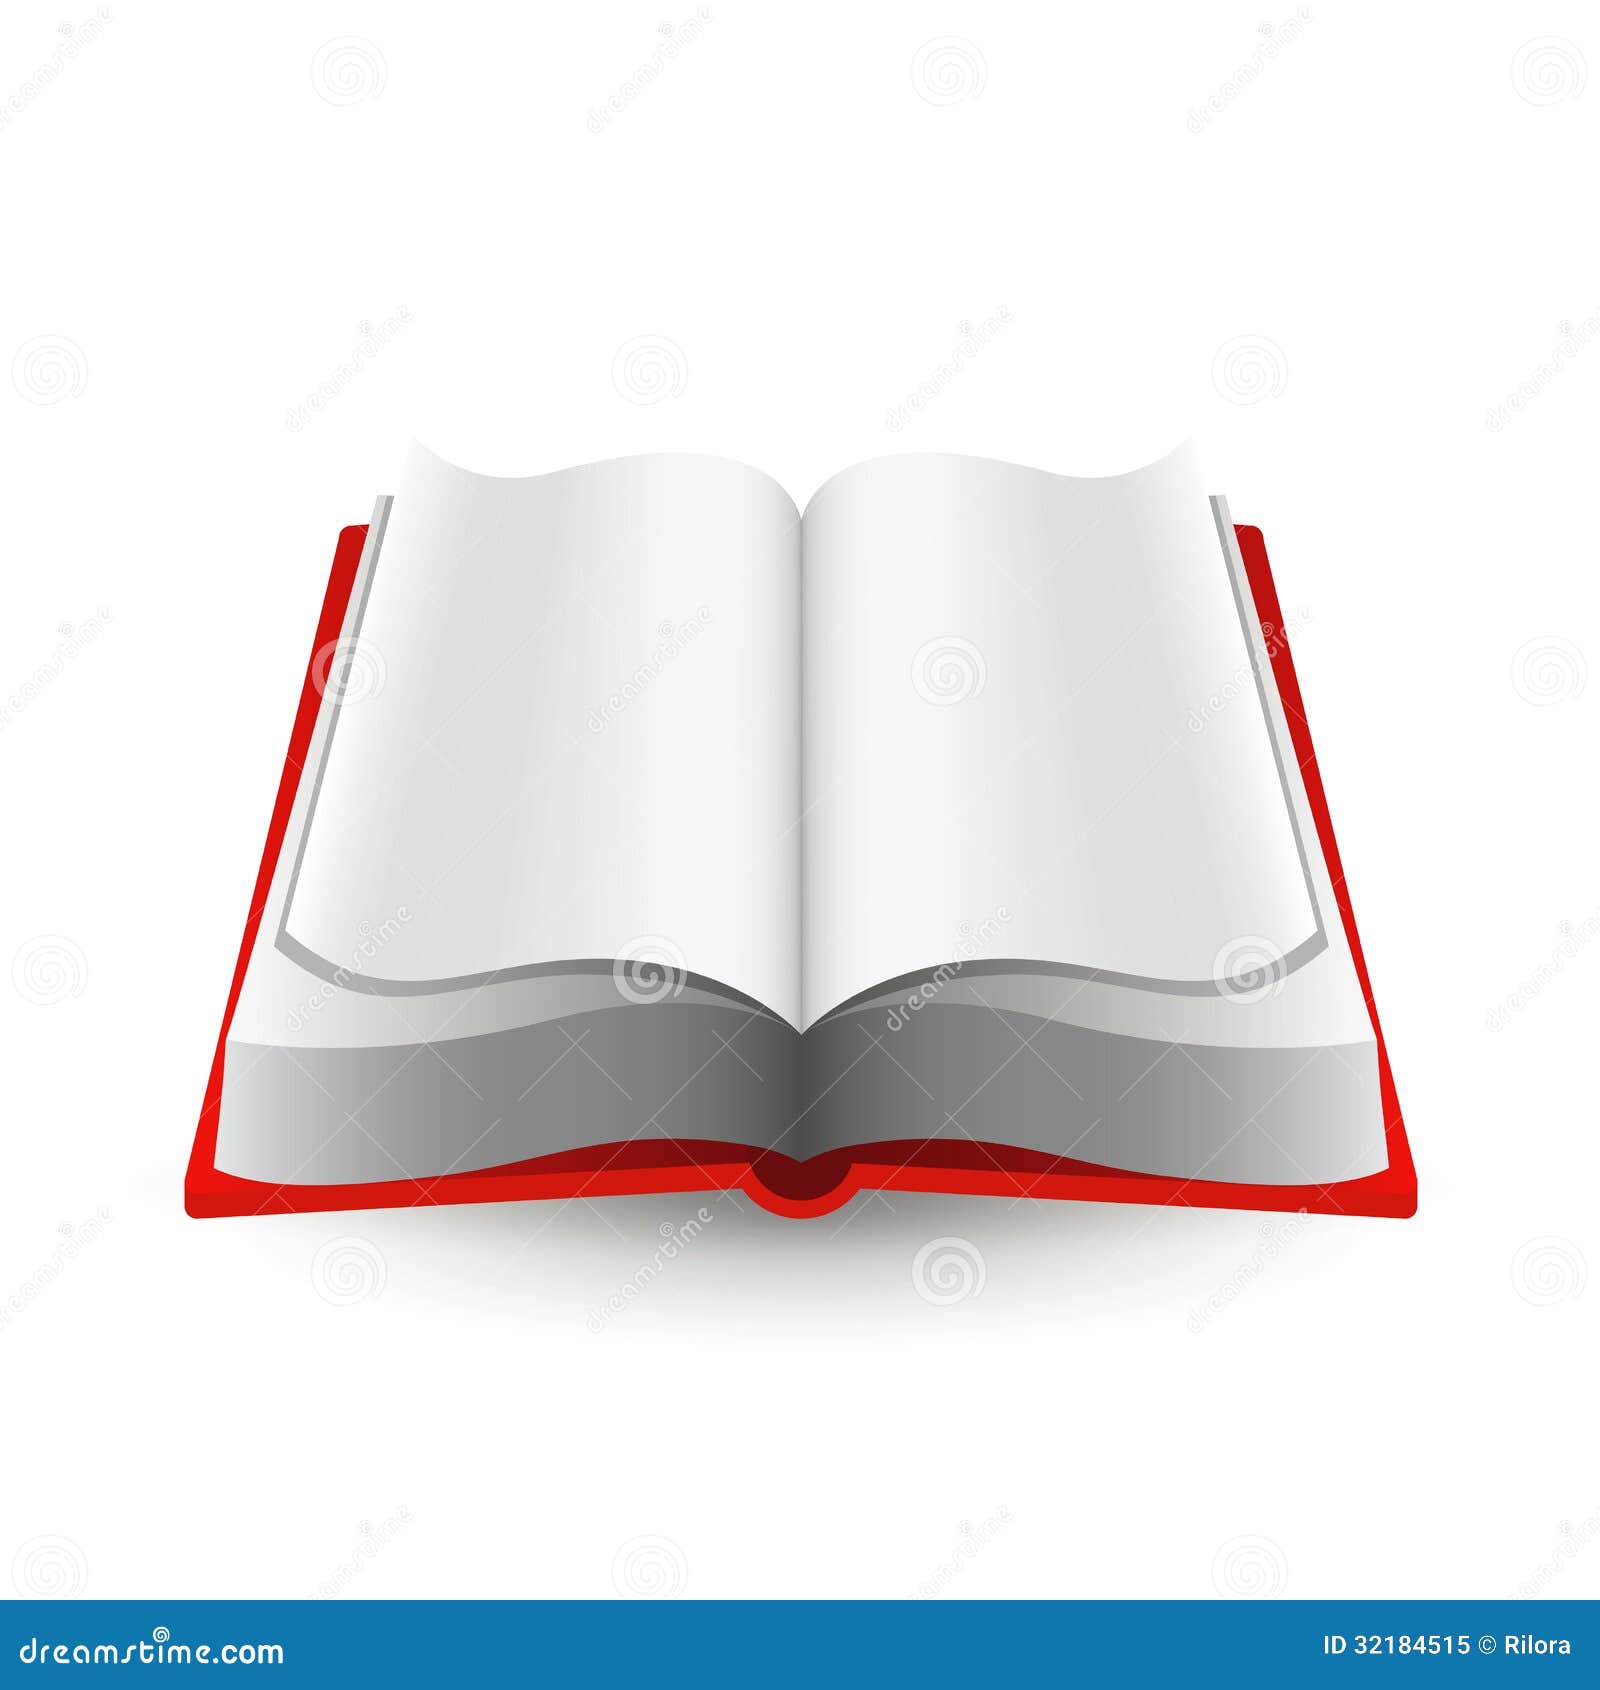 book clipart no background - photo #46